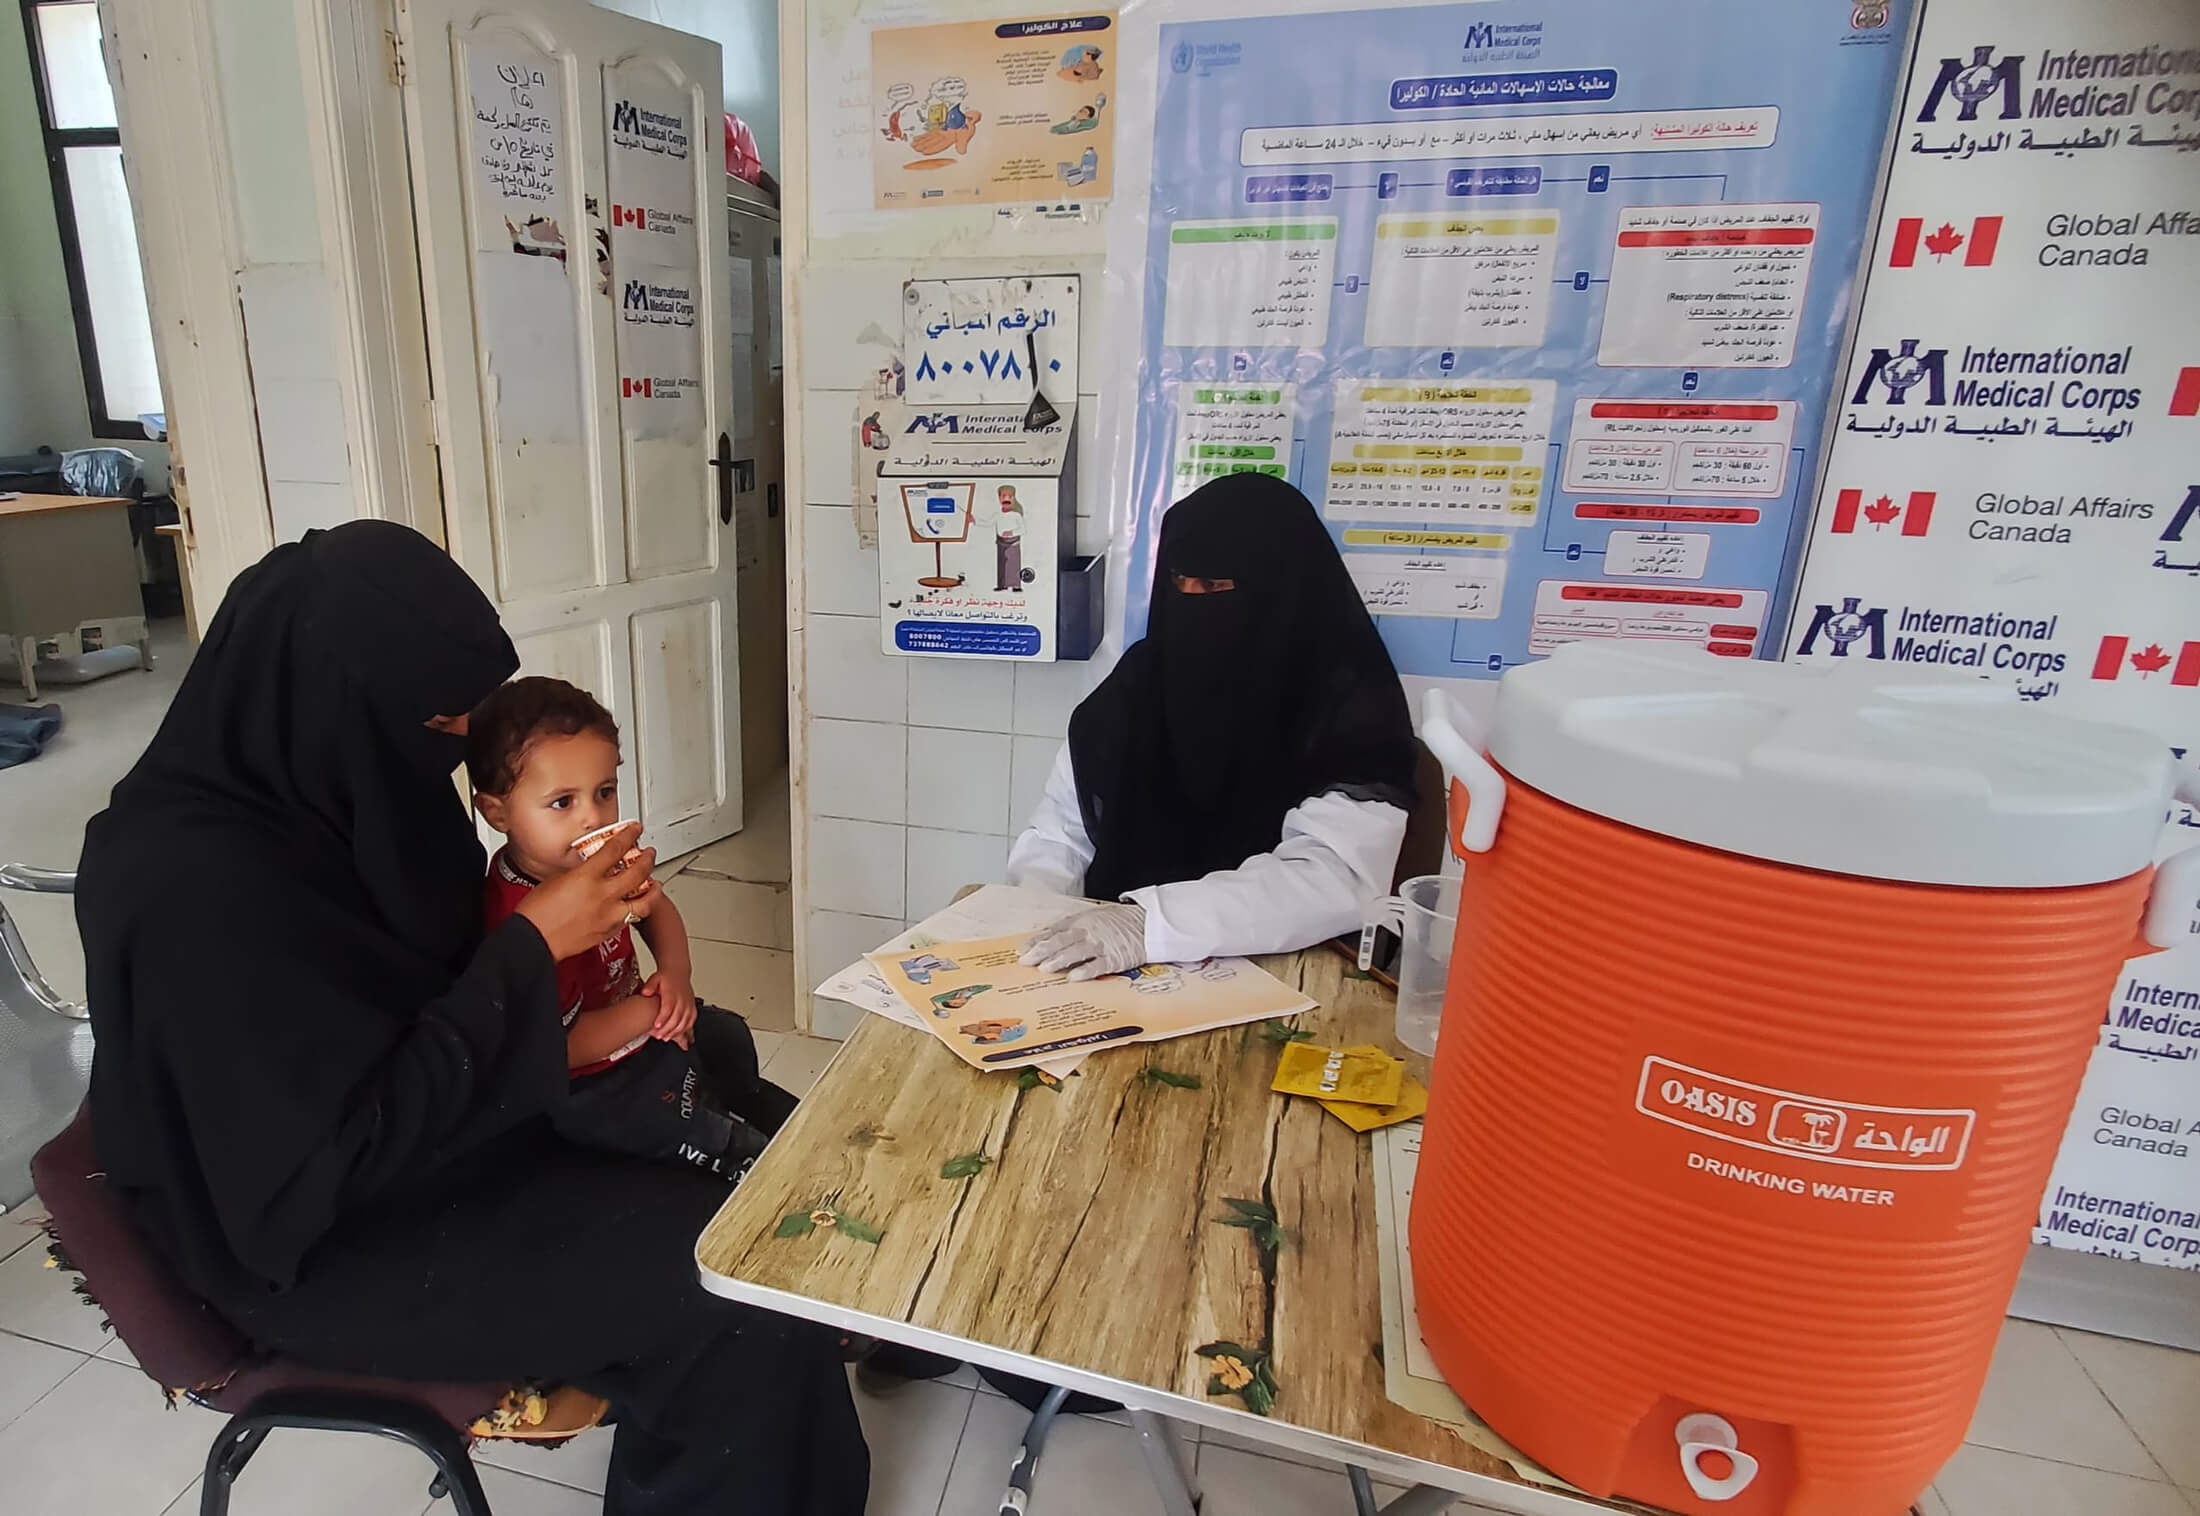 At our new oral rehydration corner in Mukideem health unit, Yemen, 2-year-old Raydan drinks rehydration solution to help prevent diarrhea-induced dehydration.